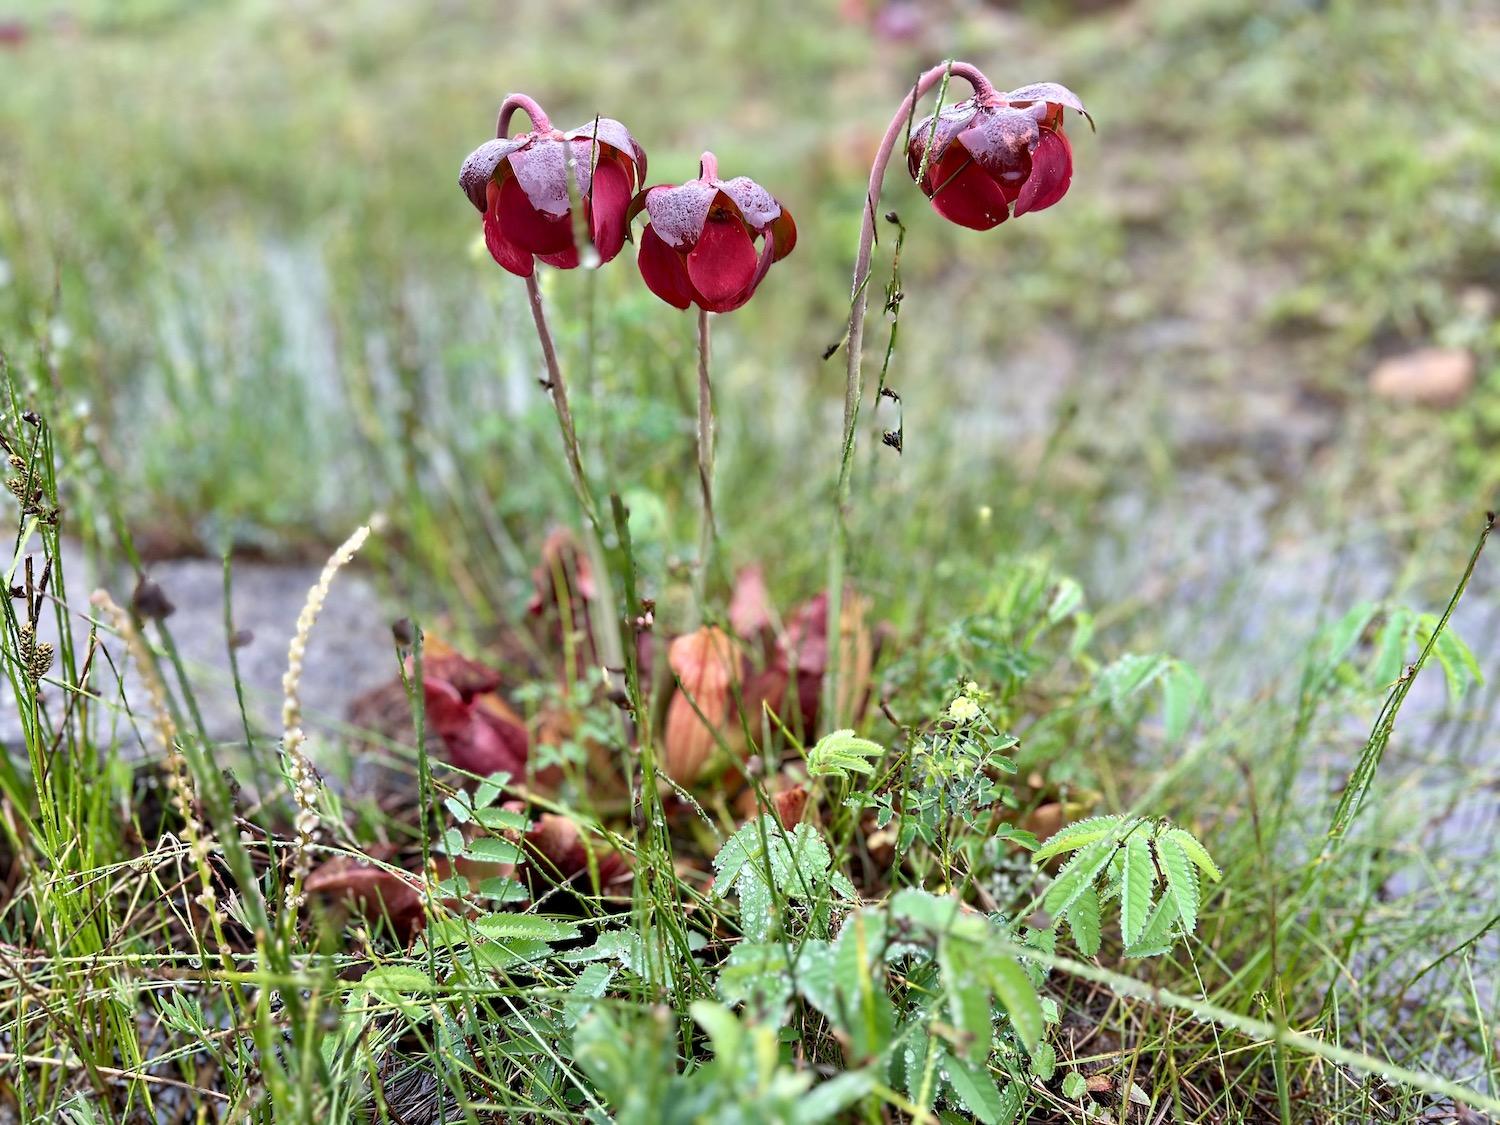 Carnivorous pitcher plants thrive in the Tablelands.